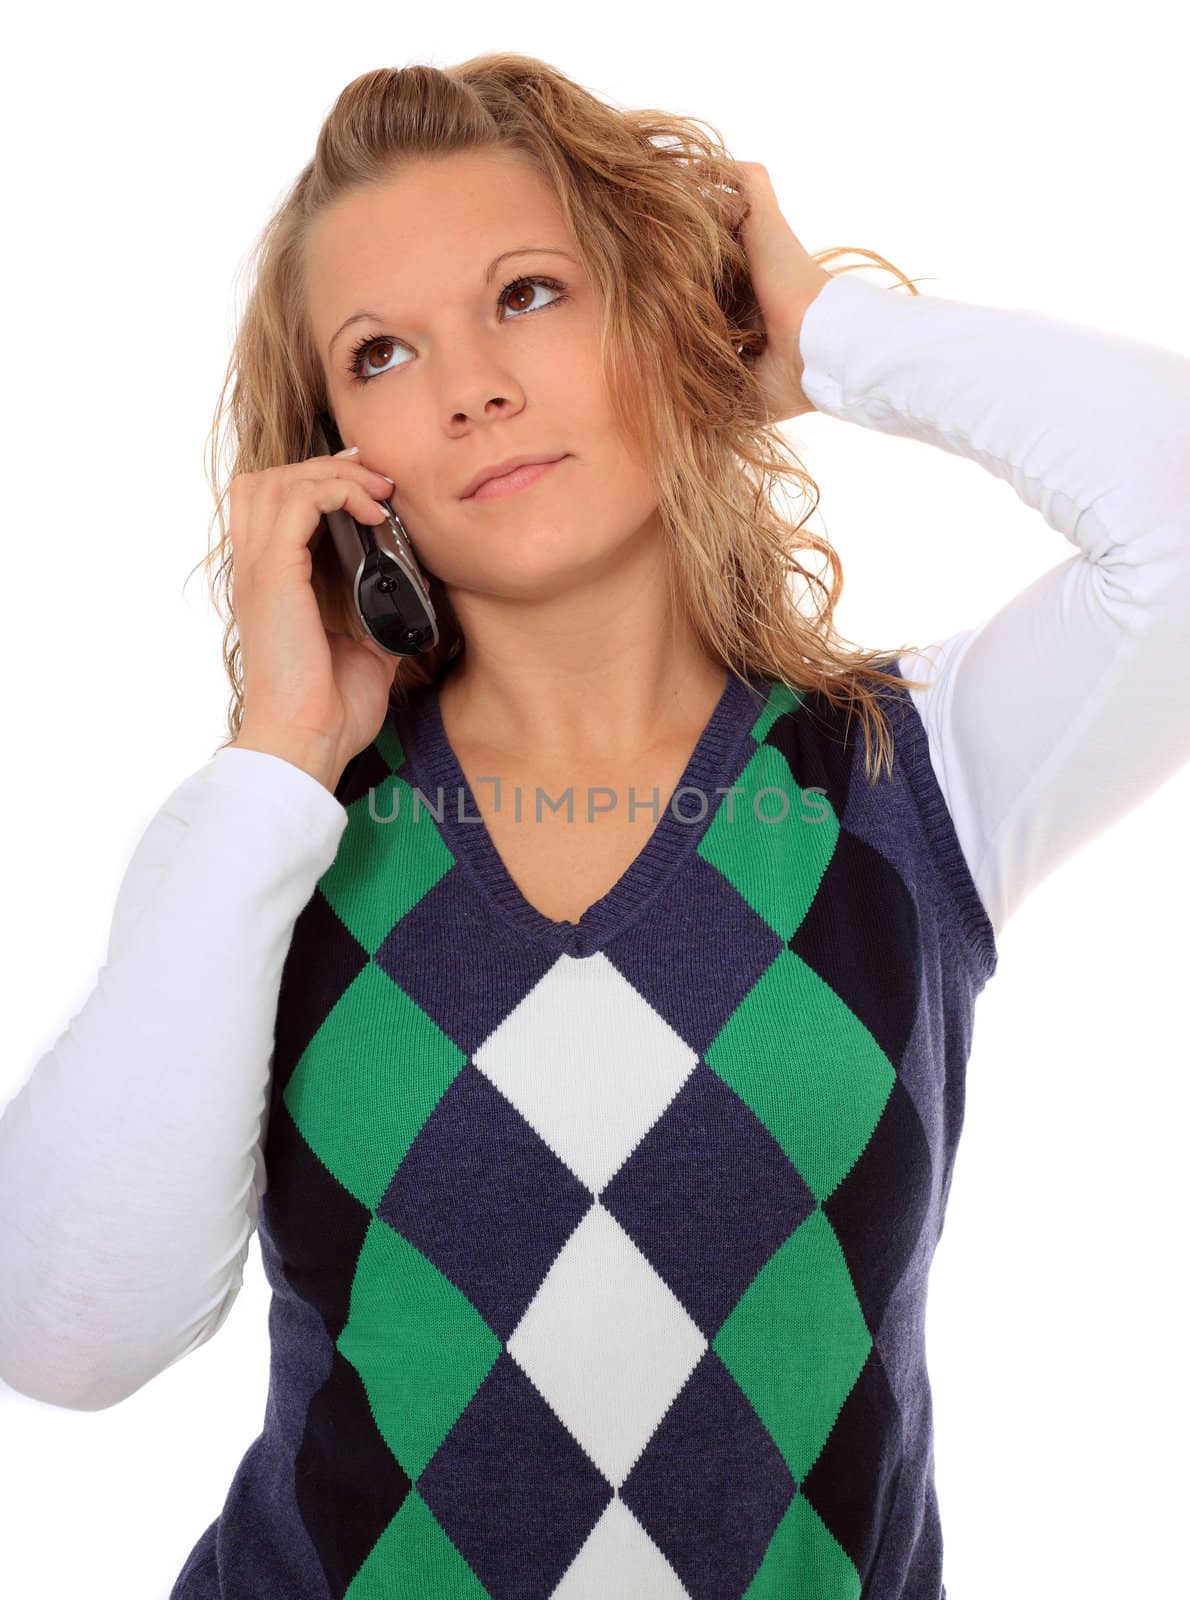 Attractive young woman making a phone call. All on white background.